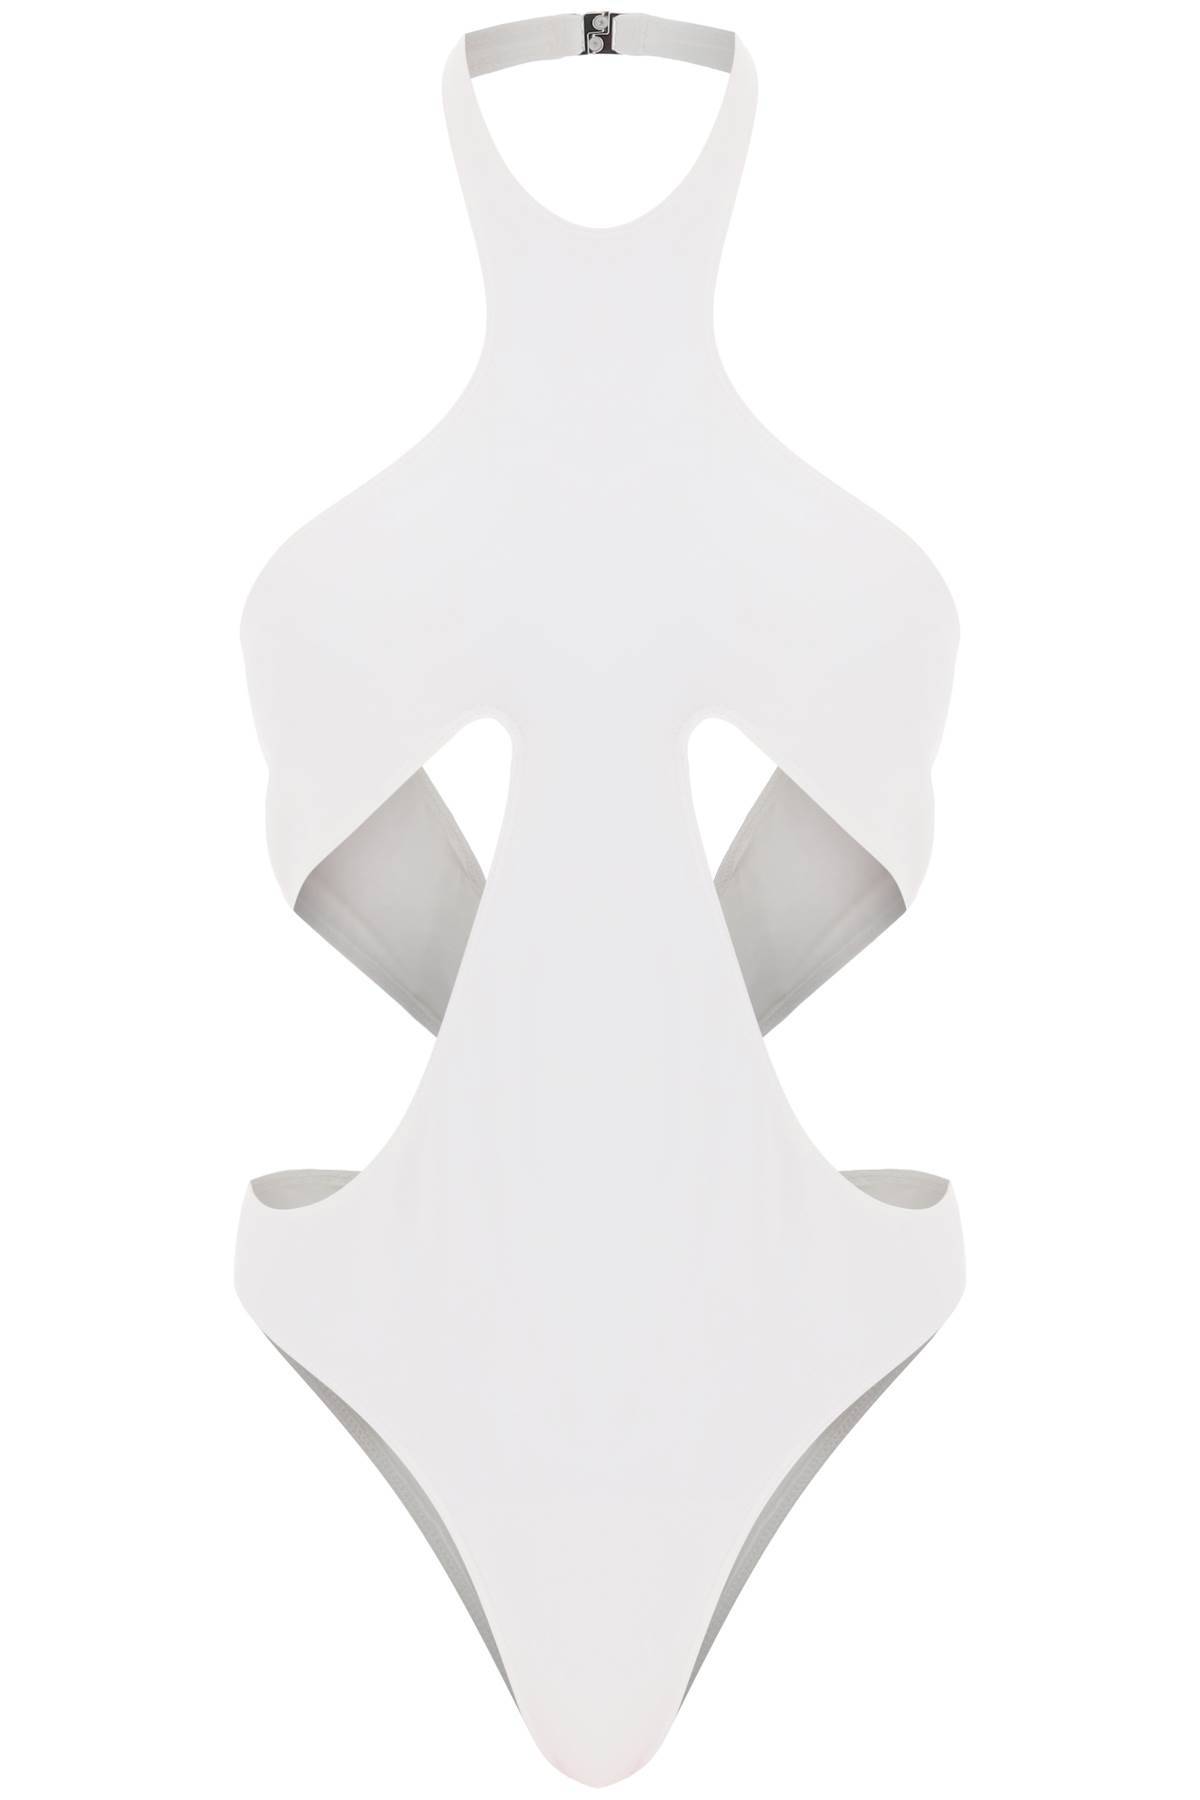 Mugler MUGLER one-piece swimsuit with cut-outs